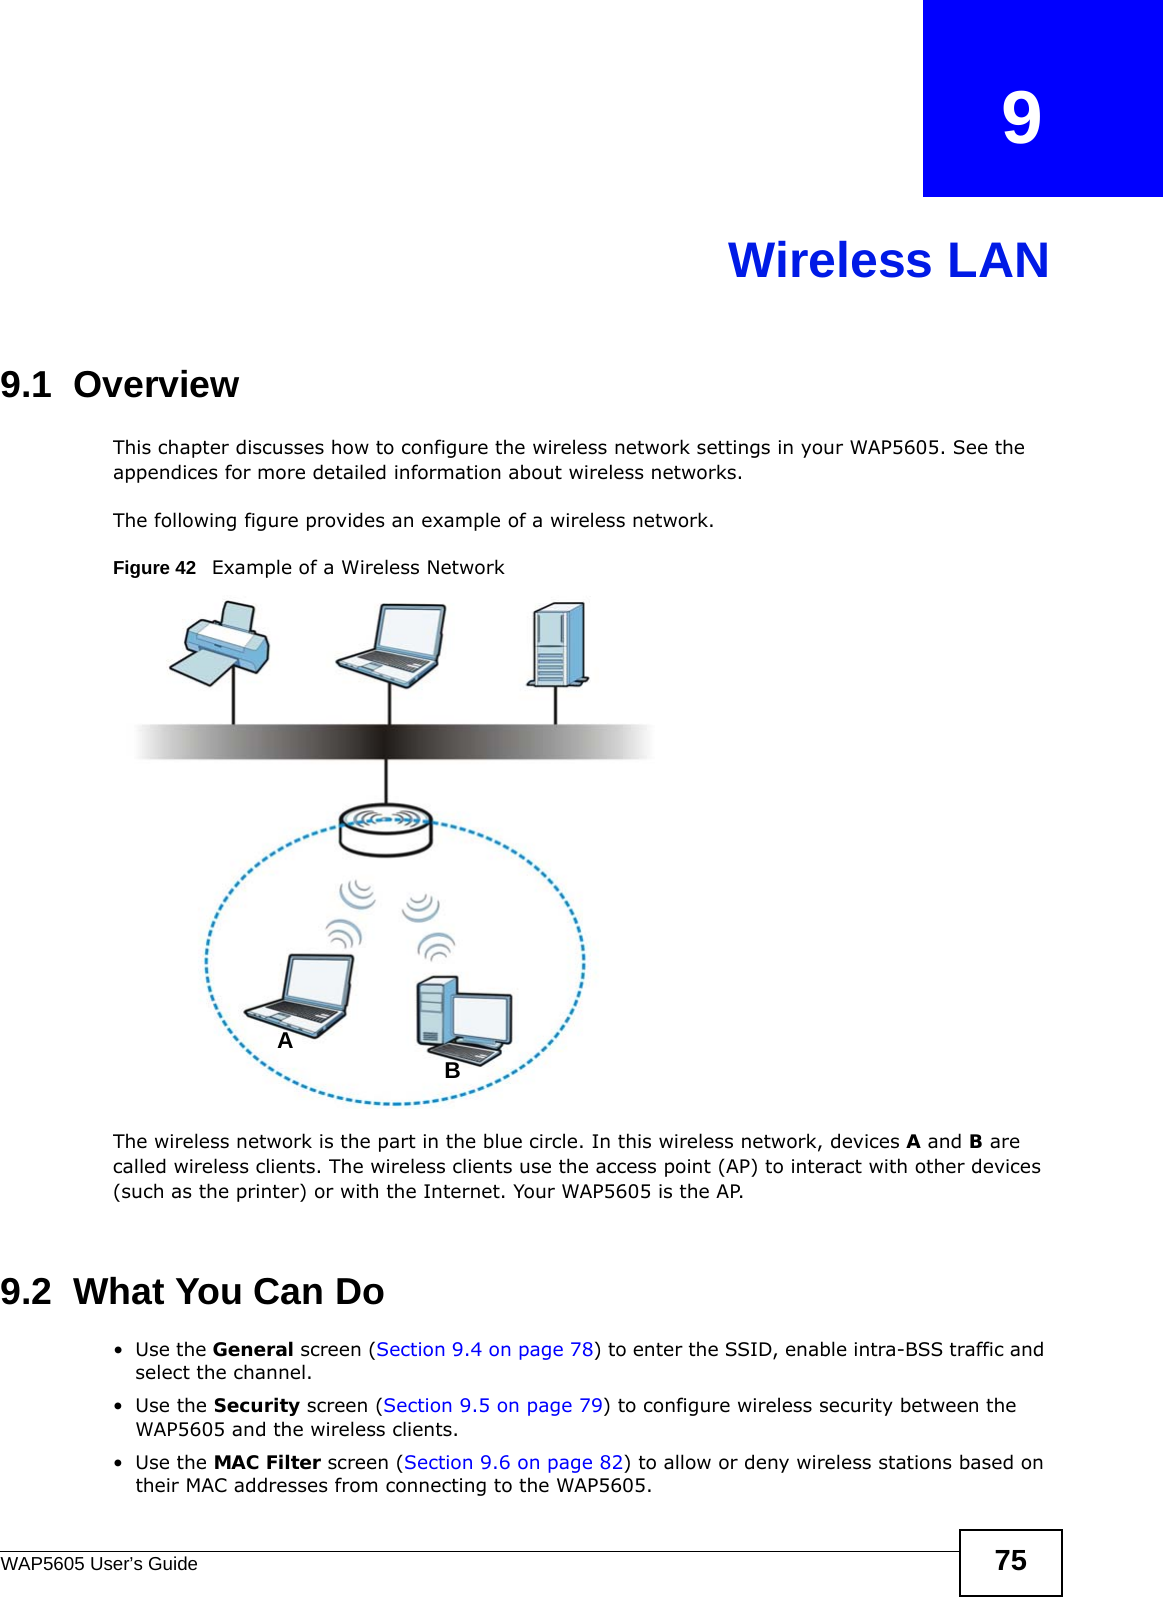 WAP5605 User’s Guide 75CHAPTER   9Wireless LAN9.1  OverviewThis chapter discusses how to configure the wireless network settings in your WAP5605. See the appendices for more detailed information about wireless networks.The following figure provides an example of a wireless network.Figure 42   Example of a Wireless NetworkThe wireless network is the part in the blue circle. In this wireless network, devices A and B are called wireless clients. The wireless clients use the access point (AP) to interact with other devices (such as the printer) or with the Internet. Your WAP5605 is the AP.9.2  What You Can Do•Use the General screen (Section 9.4 on page 78) to enter the SSID, enable intra-BSS traffic and select the channel.•Use the Security screen (Section 9.5 on page 79) to configure wireless security between the WAP5605 and the wireless clients.•Use the MAC Filter screen (Section 9.6 on page 82) to allow or deny wireless stations based on their MAC addresses from connecting to the WAP5605.AB